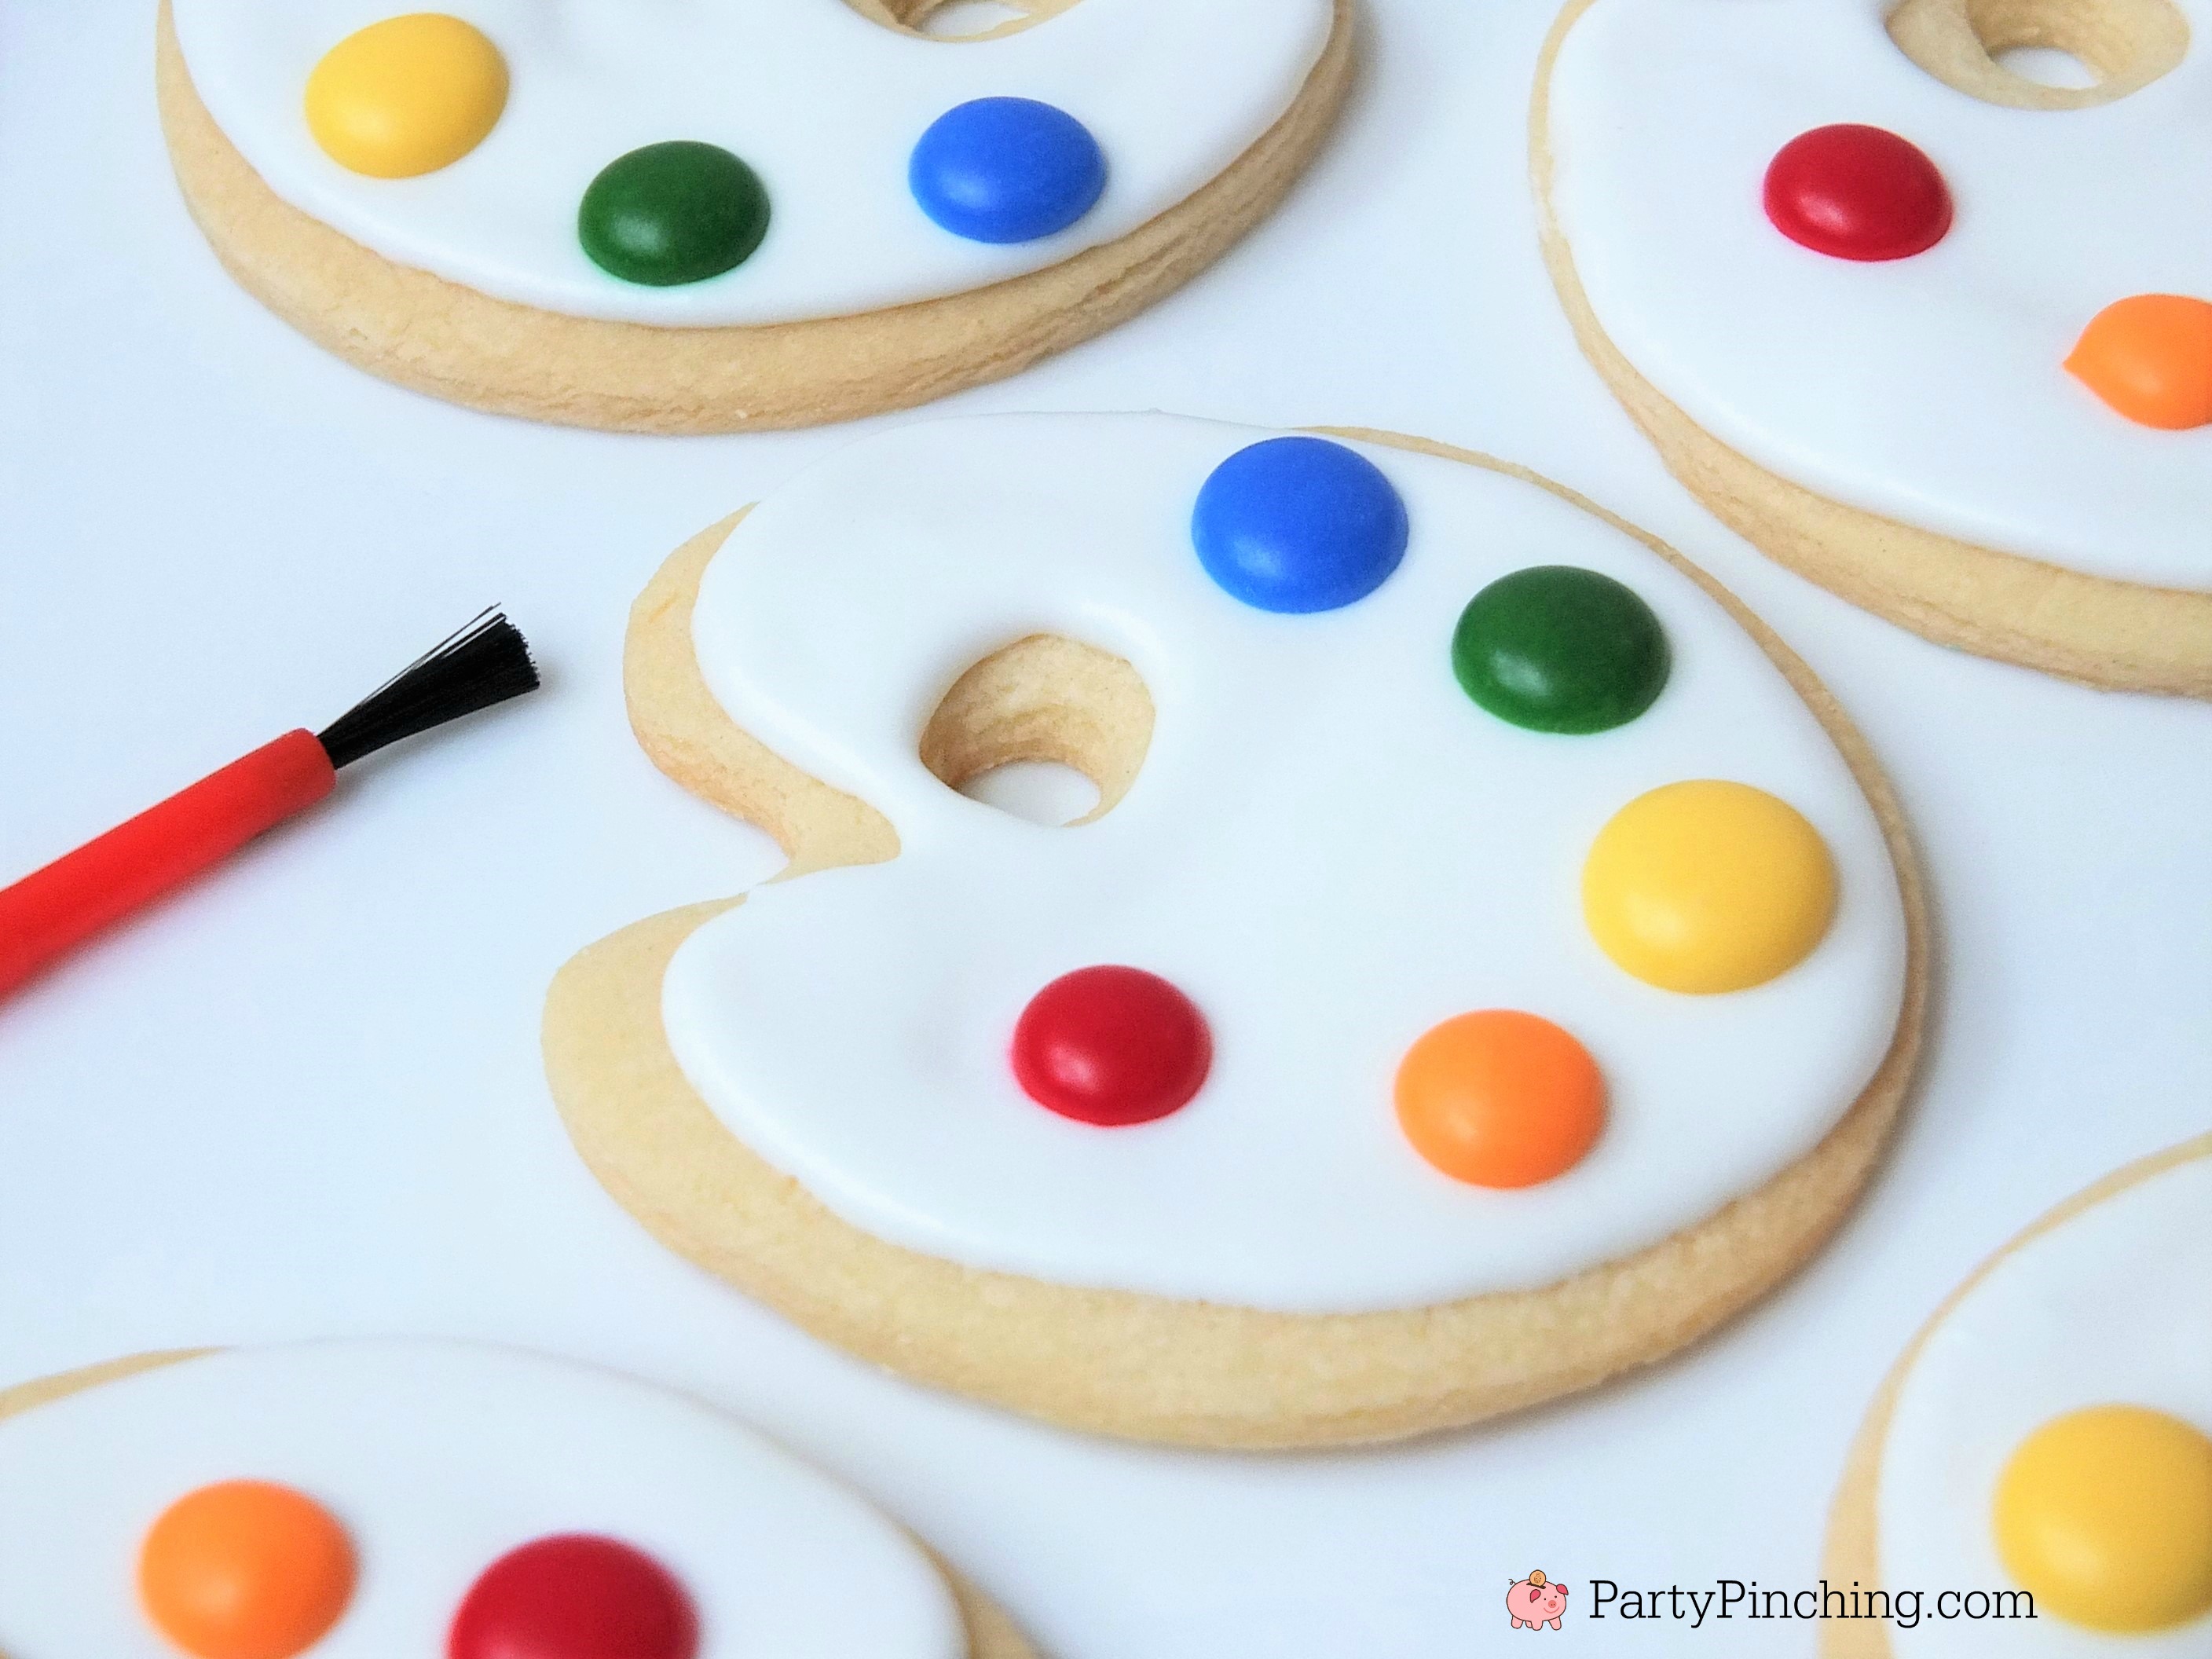 art cookies, art palette cookies, cute treats and food for art theme party, art party ideas, paint cookies